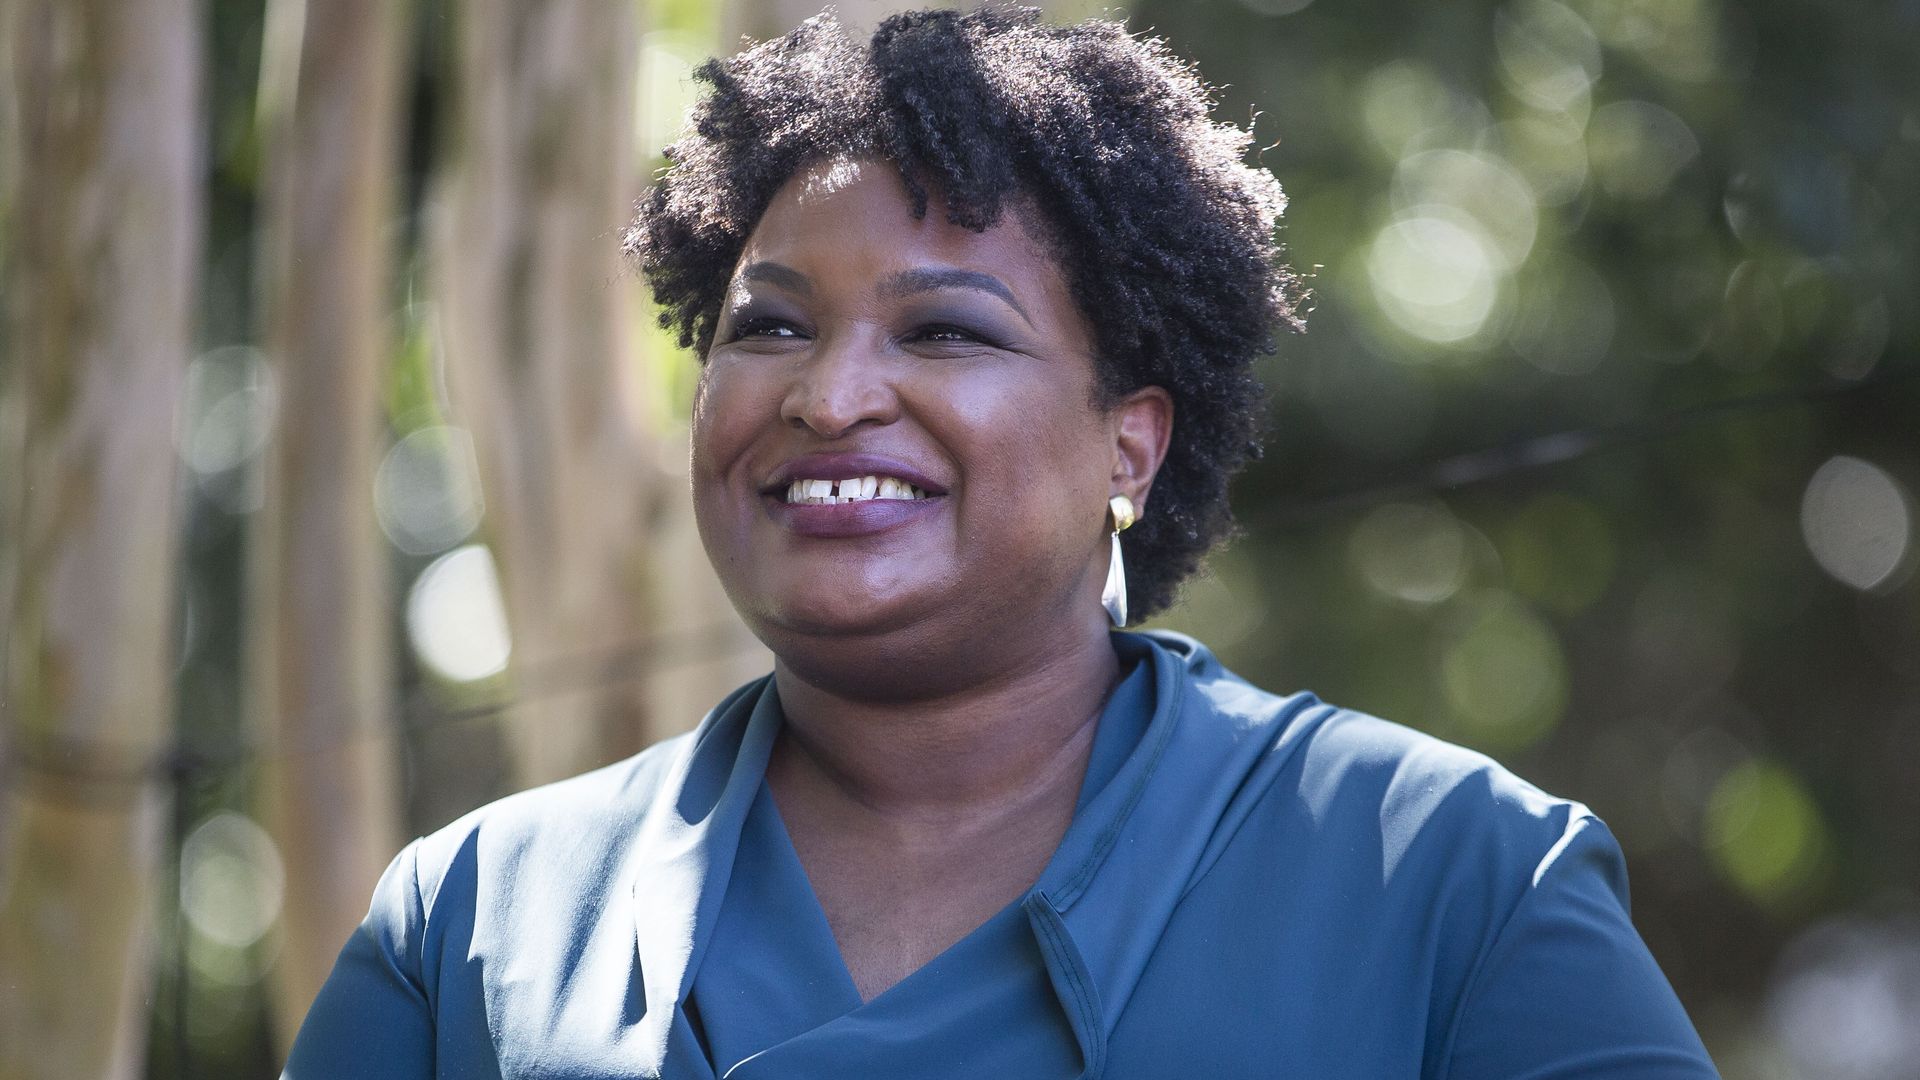 Profile photo of Democratic gubernatorial candidate Stacey Abrams smiling